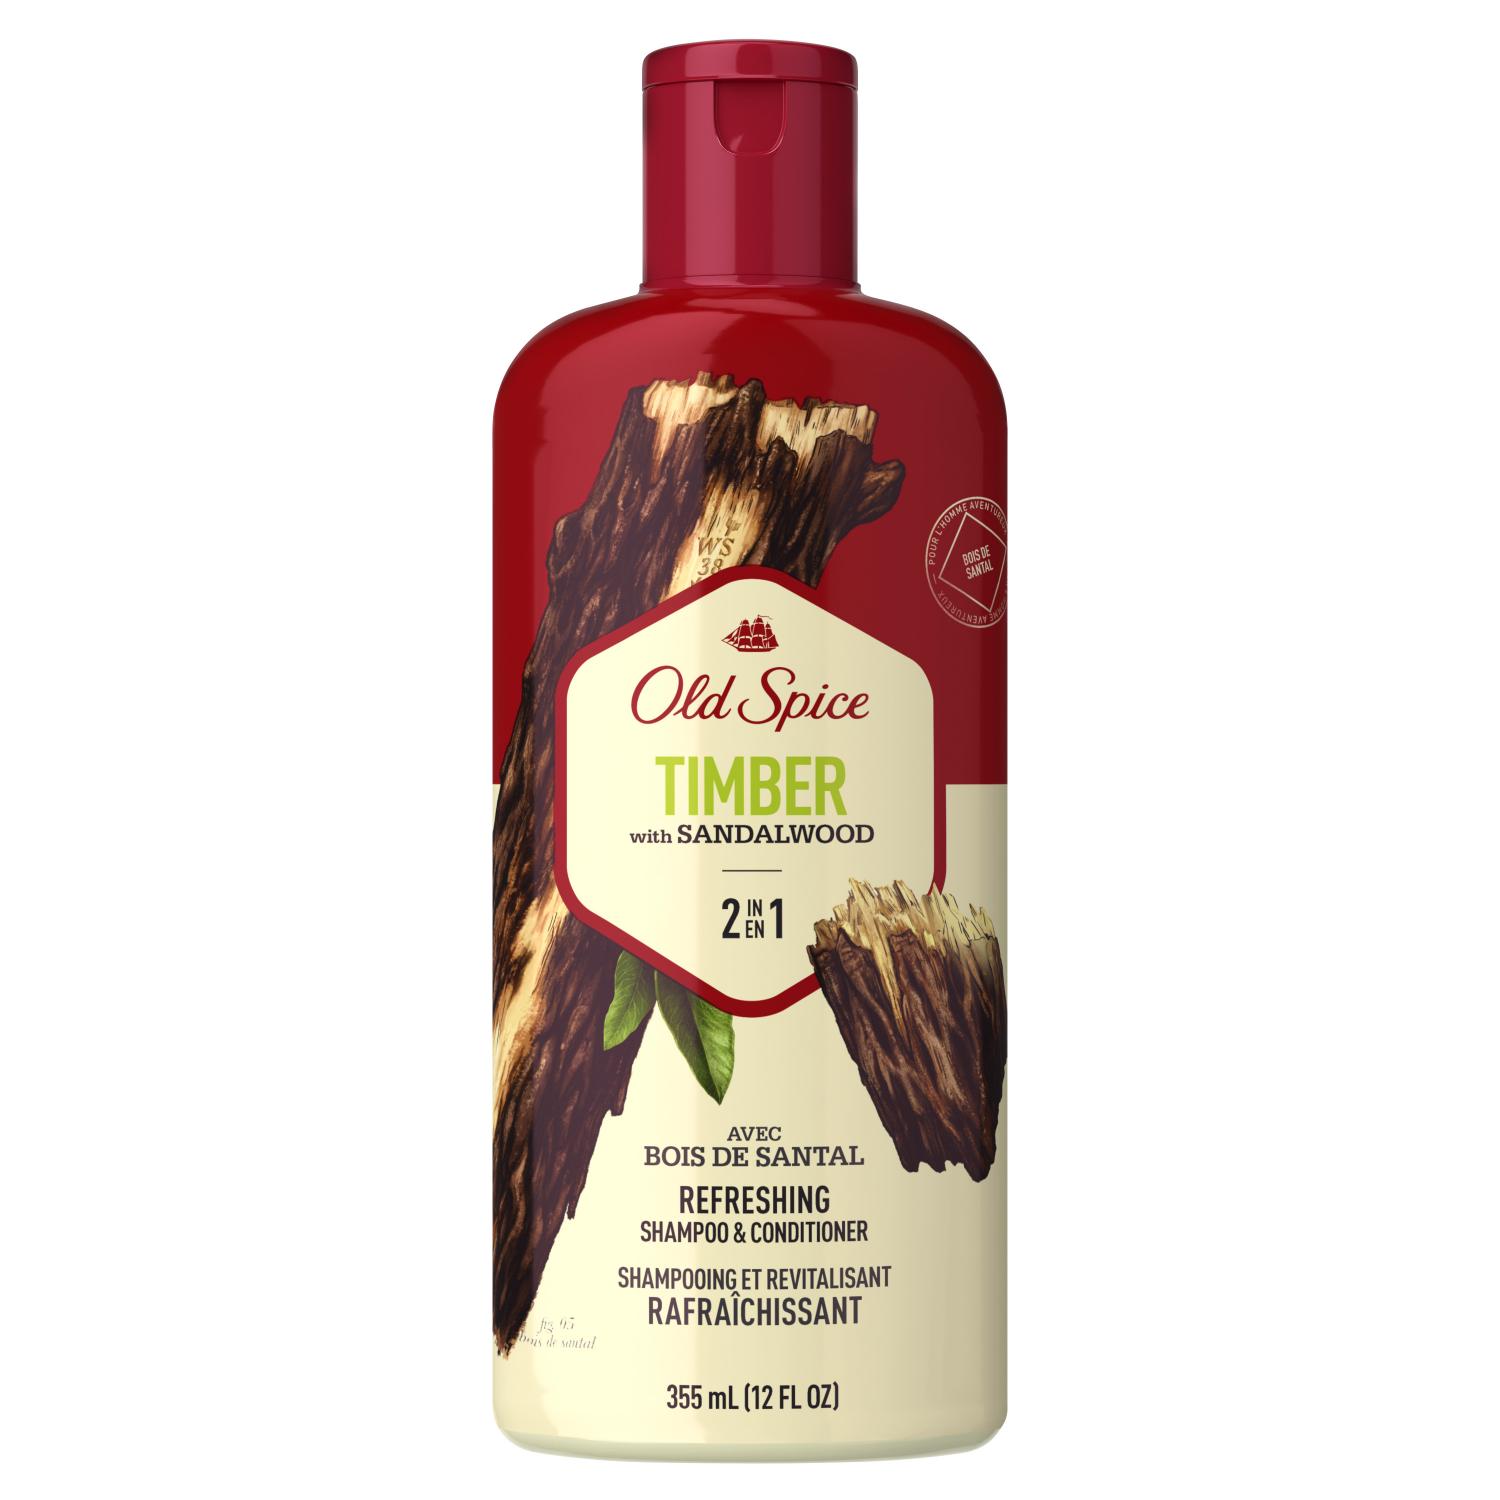 Old Spice Timber with Mint 2 in 1 Shampoo and Conditioner 12 fl oz